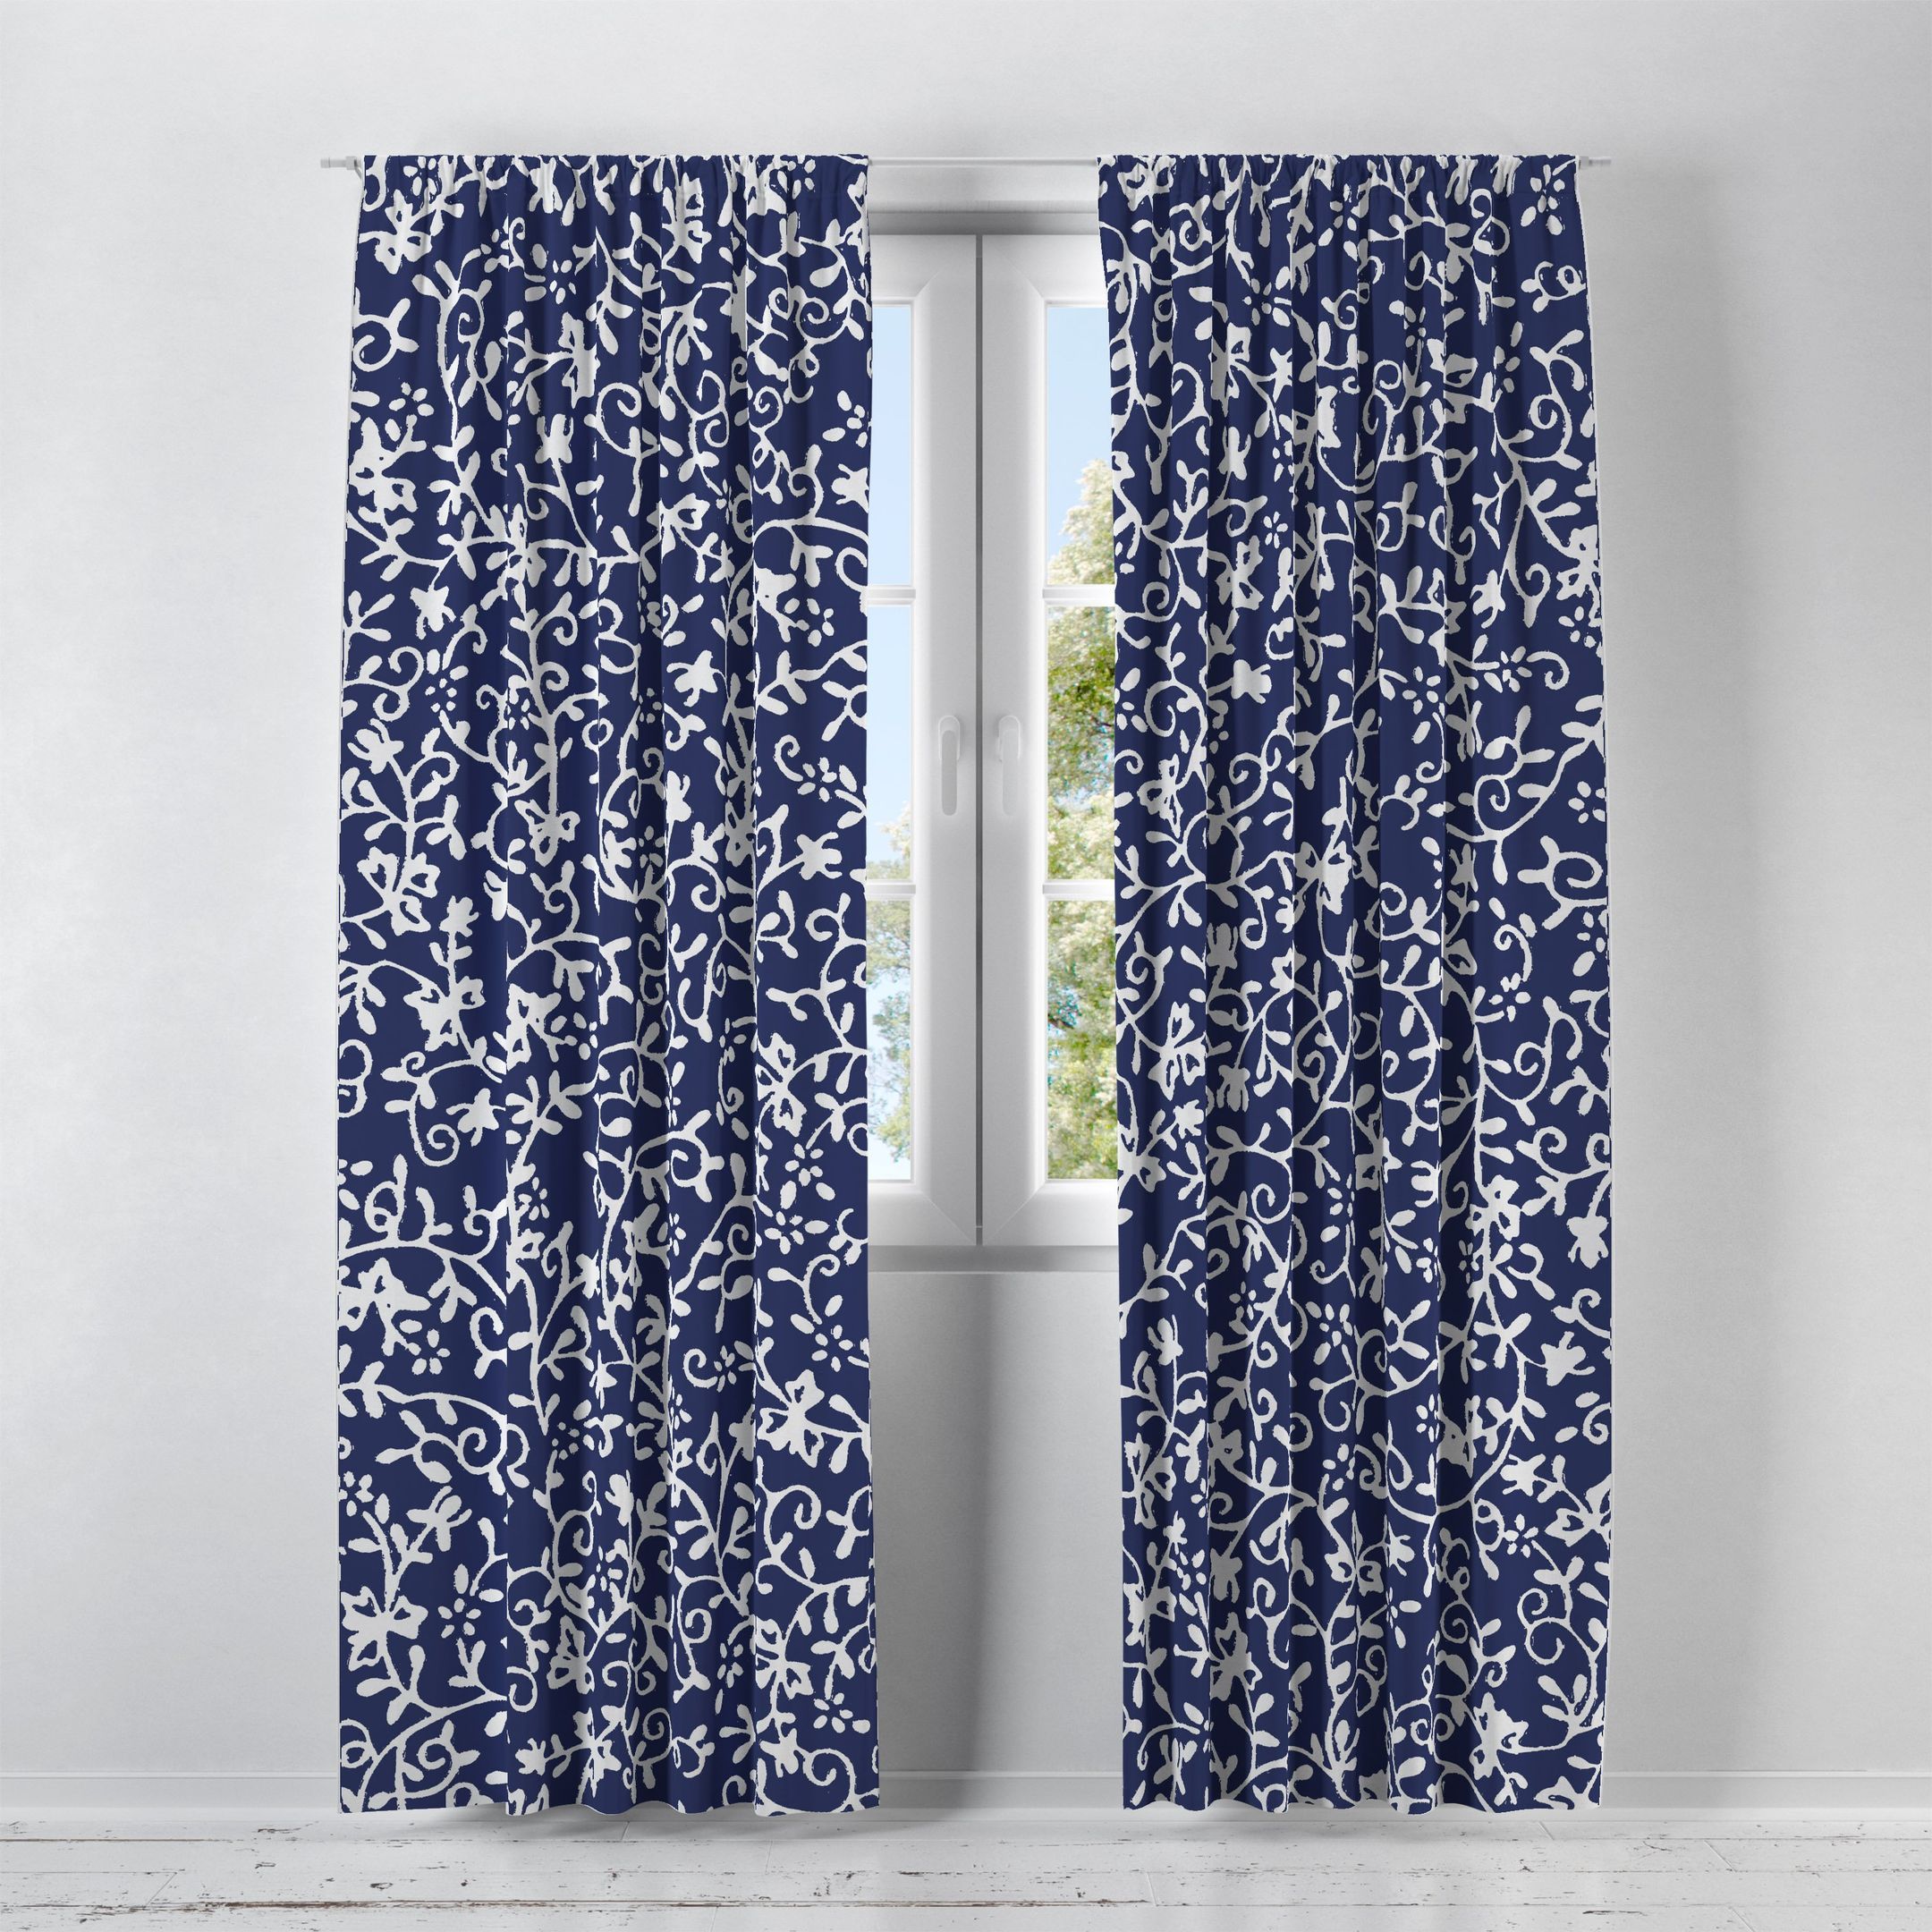 Attractive  Navy Blue White Vines Printed Window Curtains Home Decor